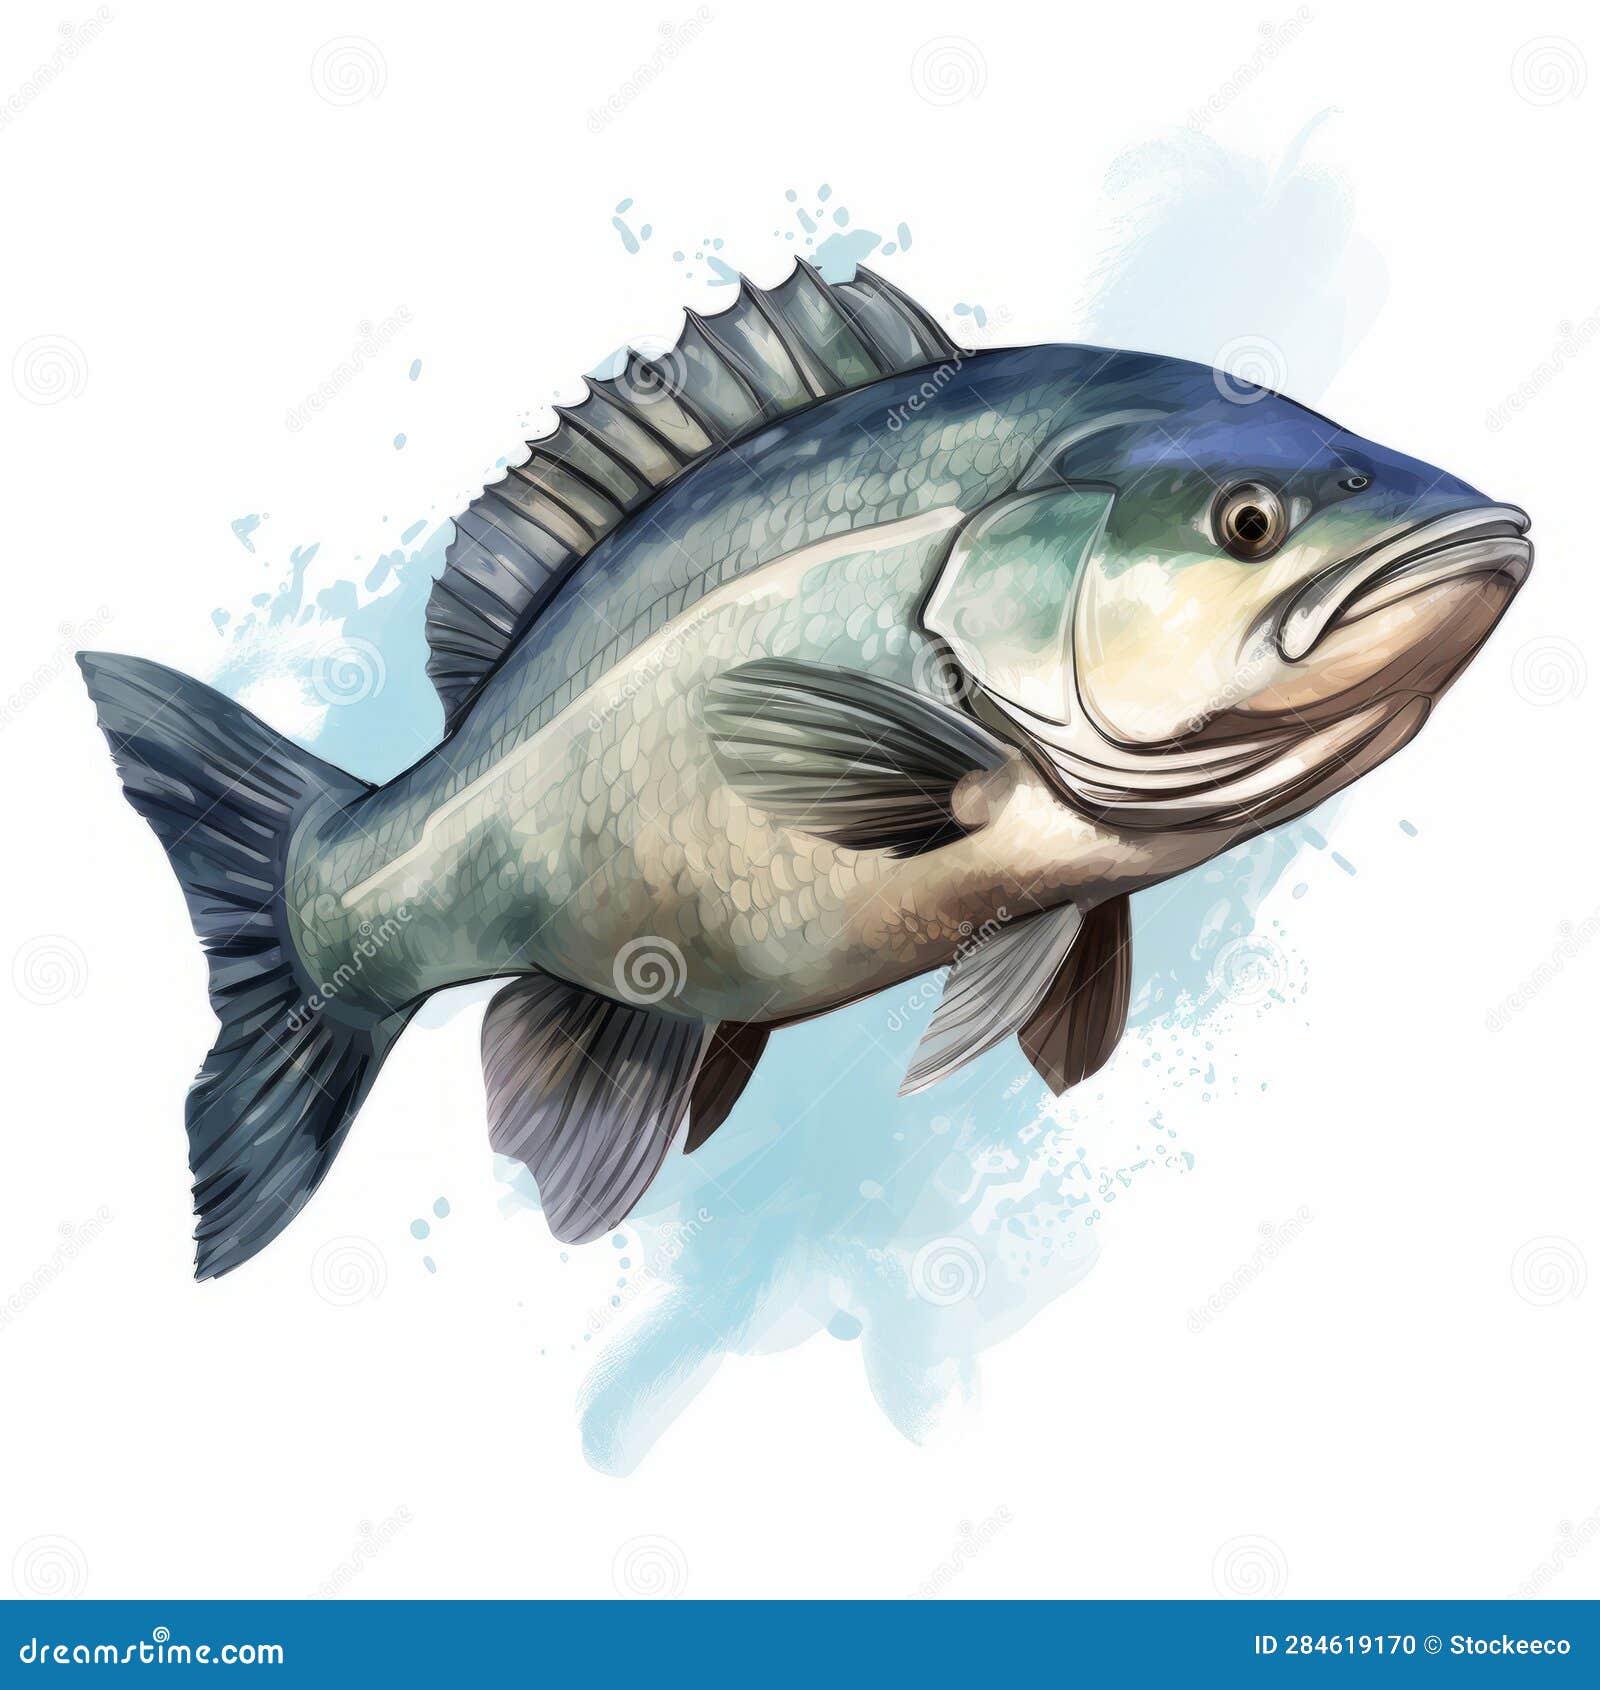 watercolor style barramundi clipart with white background